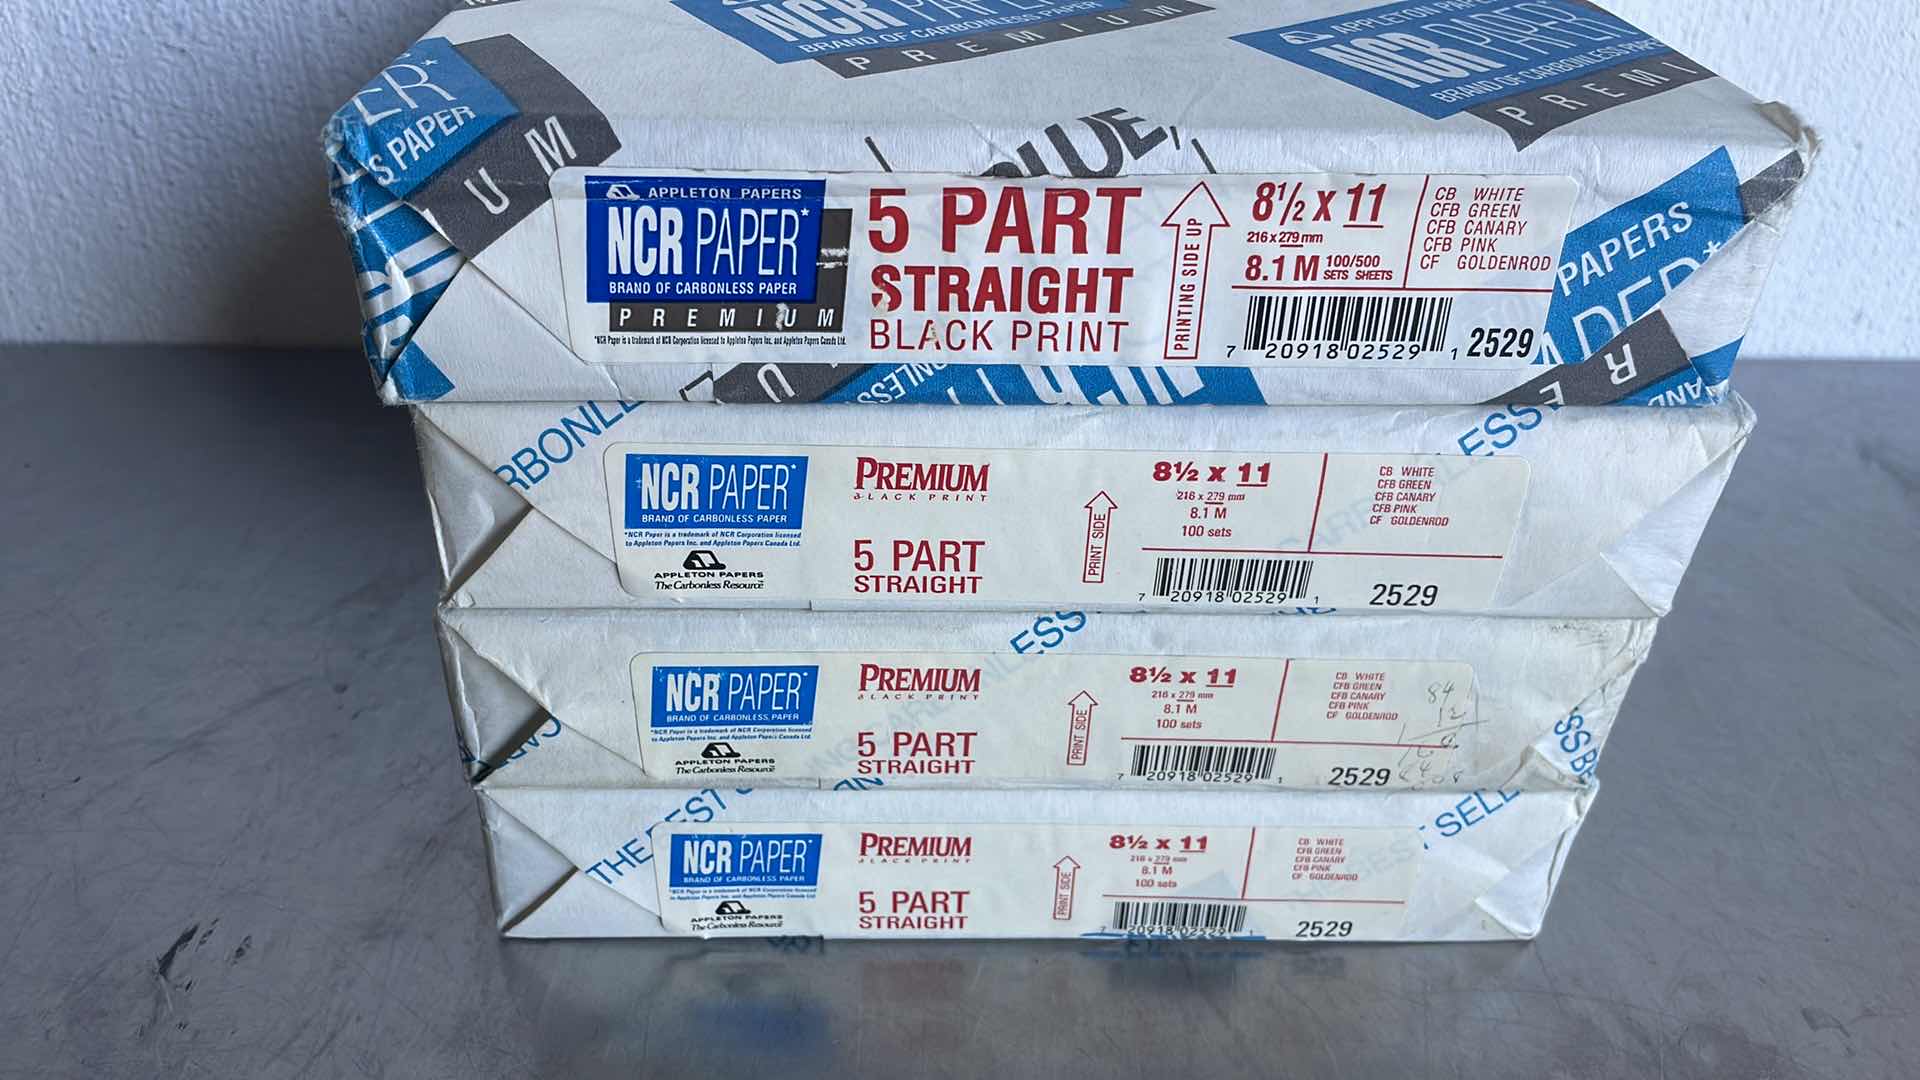 Photo 2 of NCR PAPER BRAND OF CARBONLESS PAPER PREMIUM 5 PART STRAIGHT